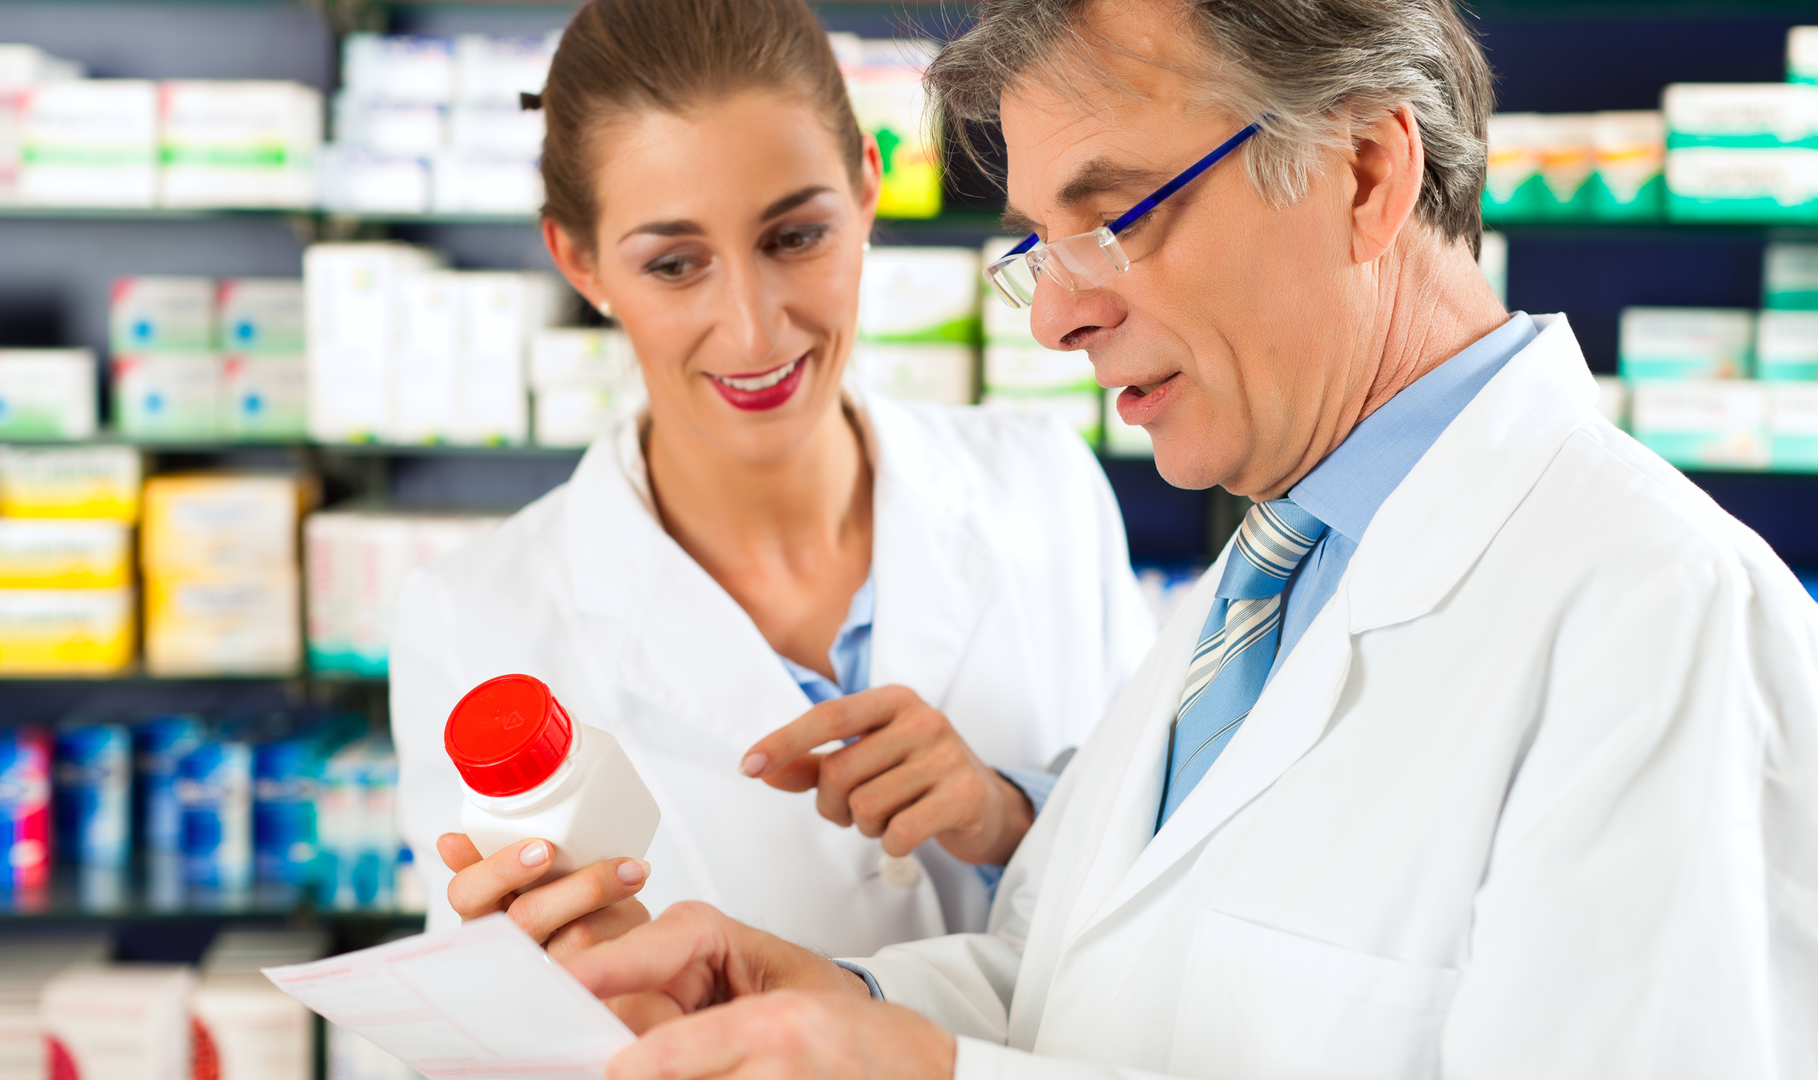 An older male pharmacist educating a younger female pharmacist while holding up a pill bottle